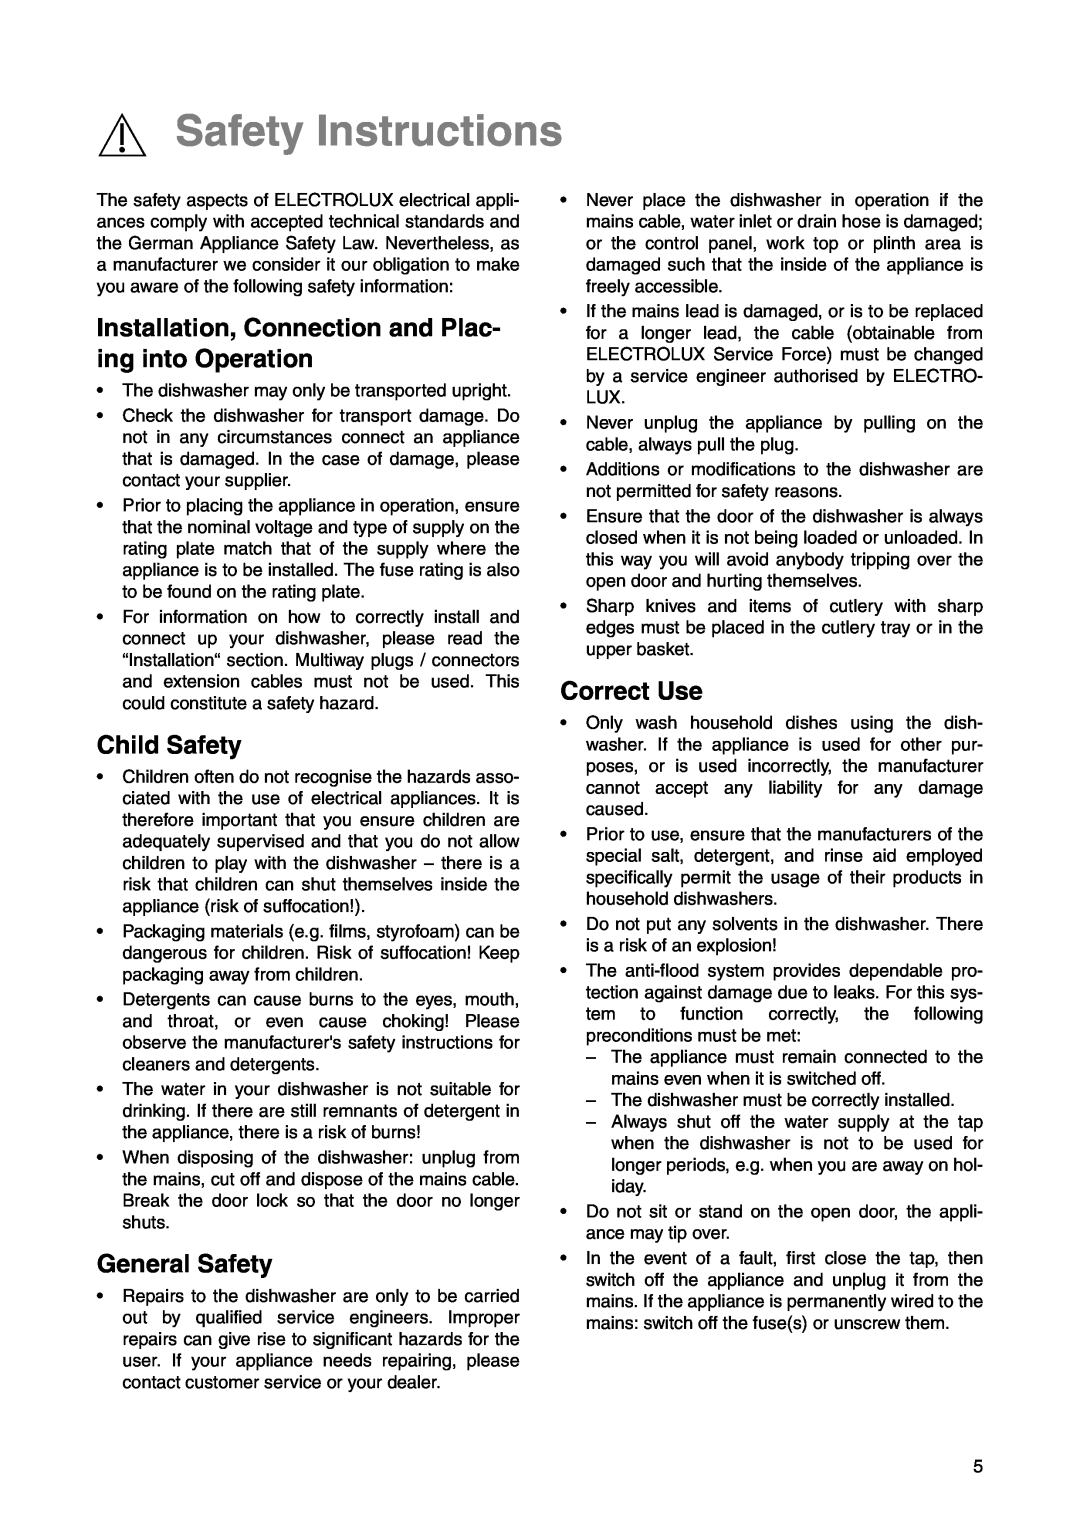 Electrolux ESI 6220 Safety Instructions, Installation, Connection and Plac- ing into Operation, Child Safety, Correct Use 